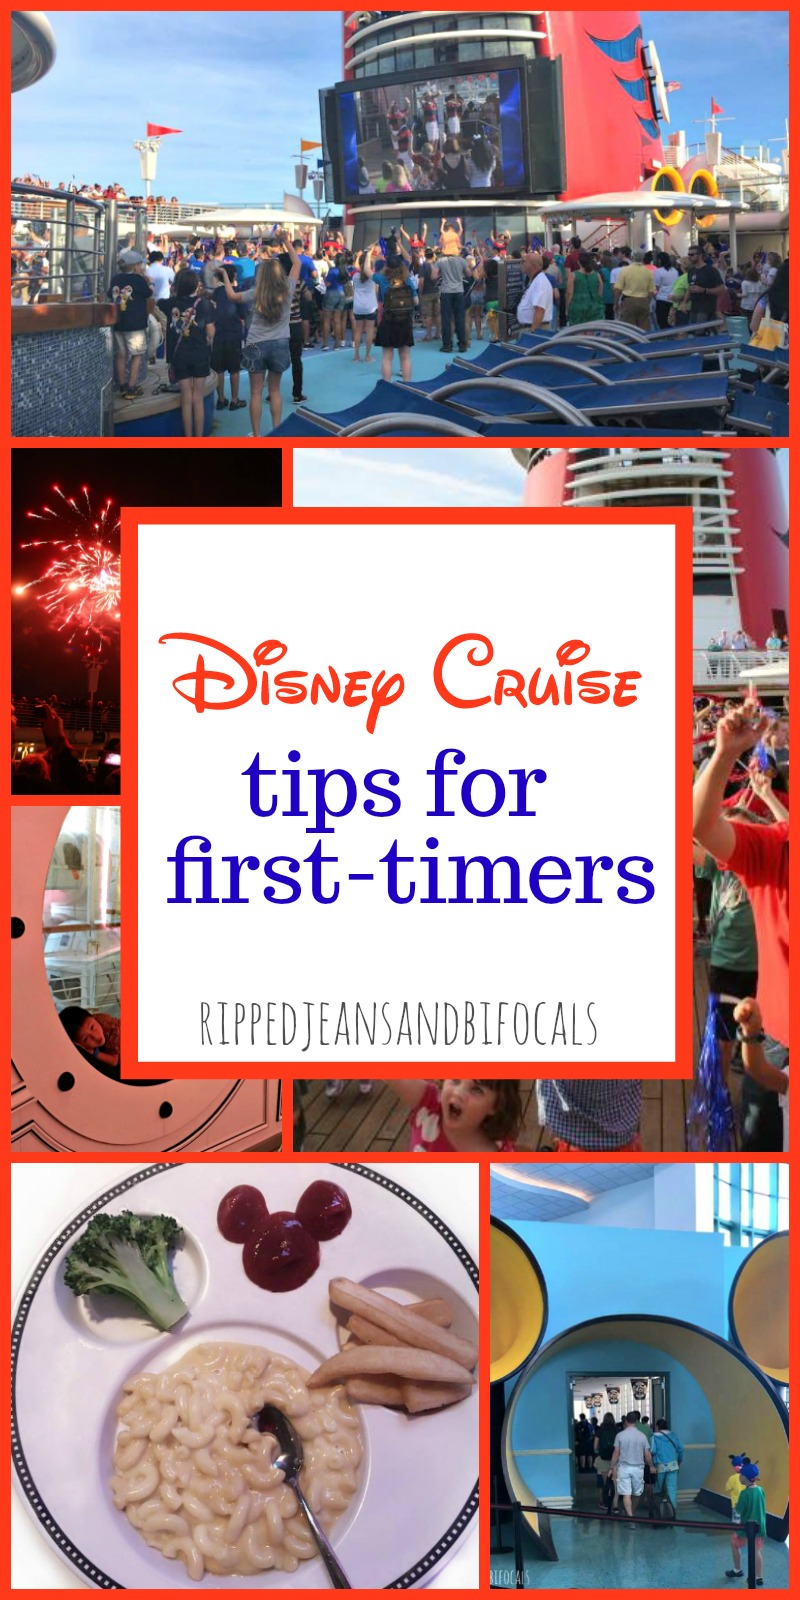 Disney Cruise Tips for First Timers...if you have questions, this is the place to start!|Ripped Jeans and Bifocals